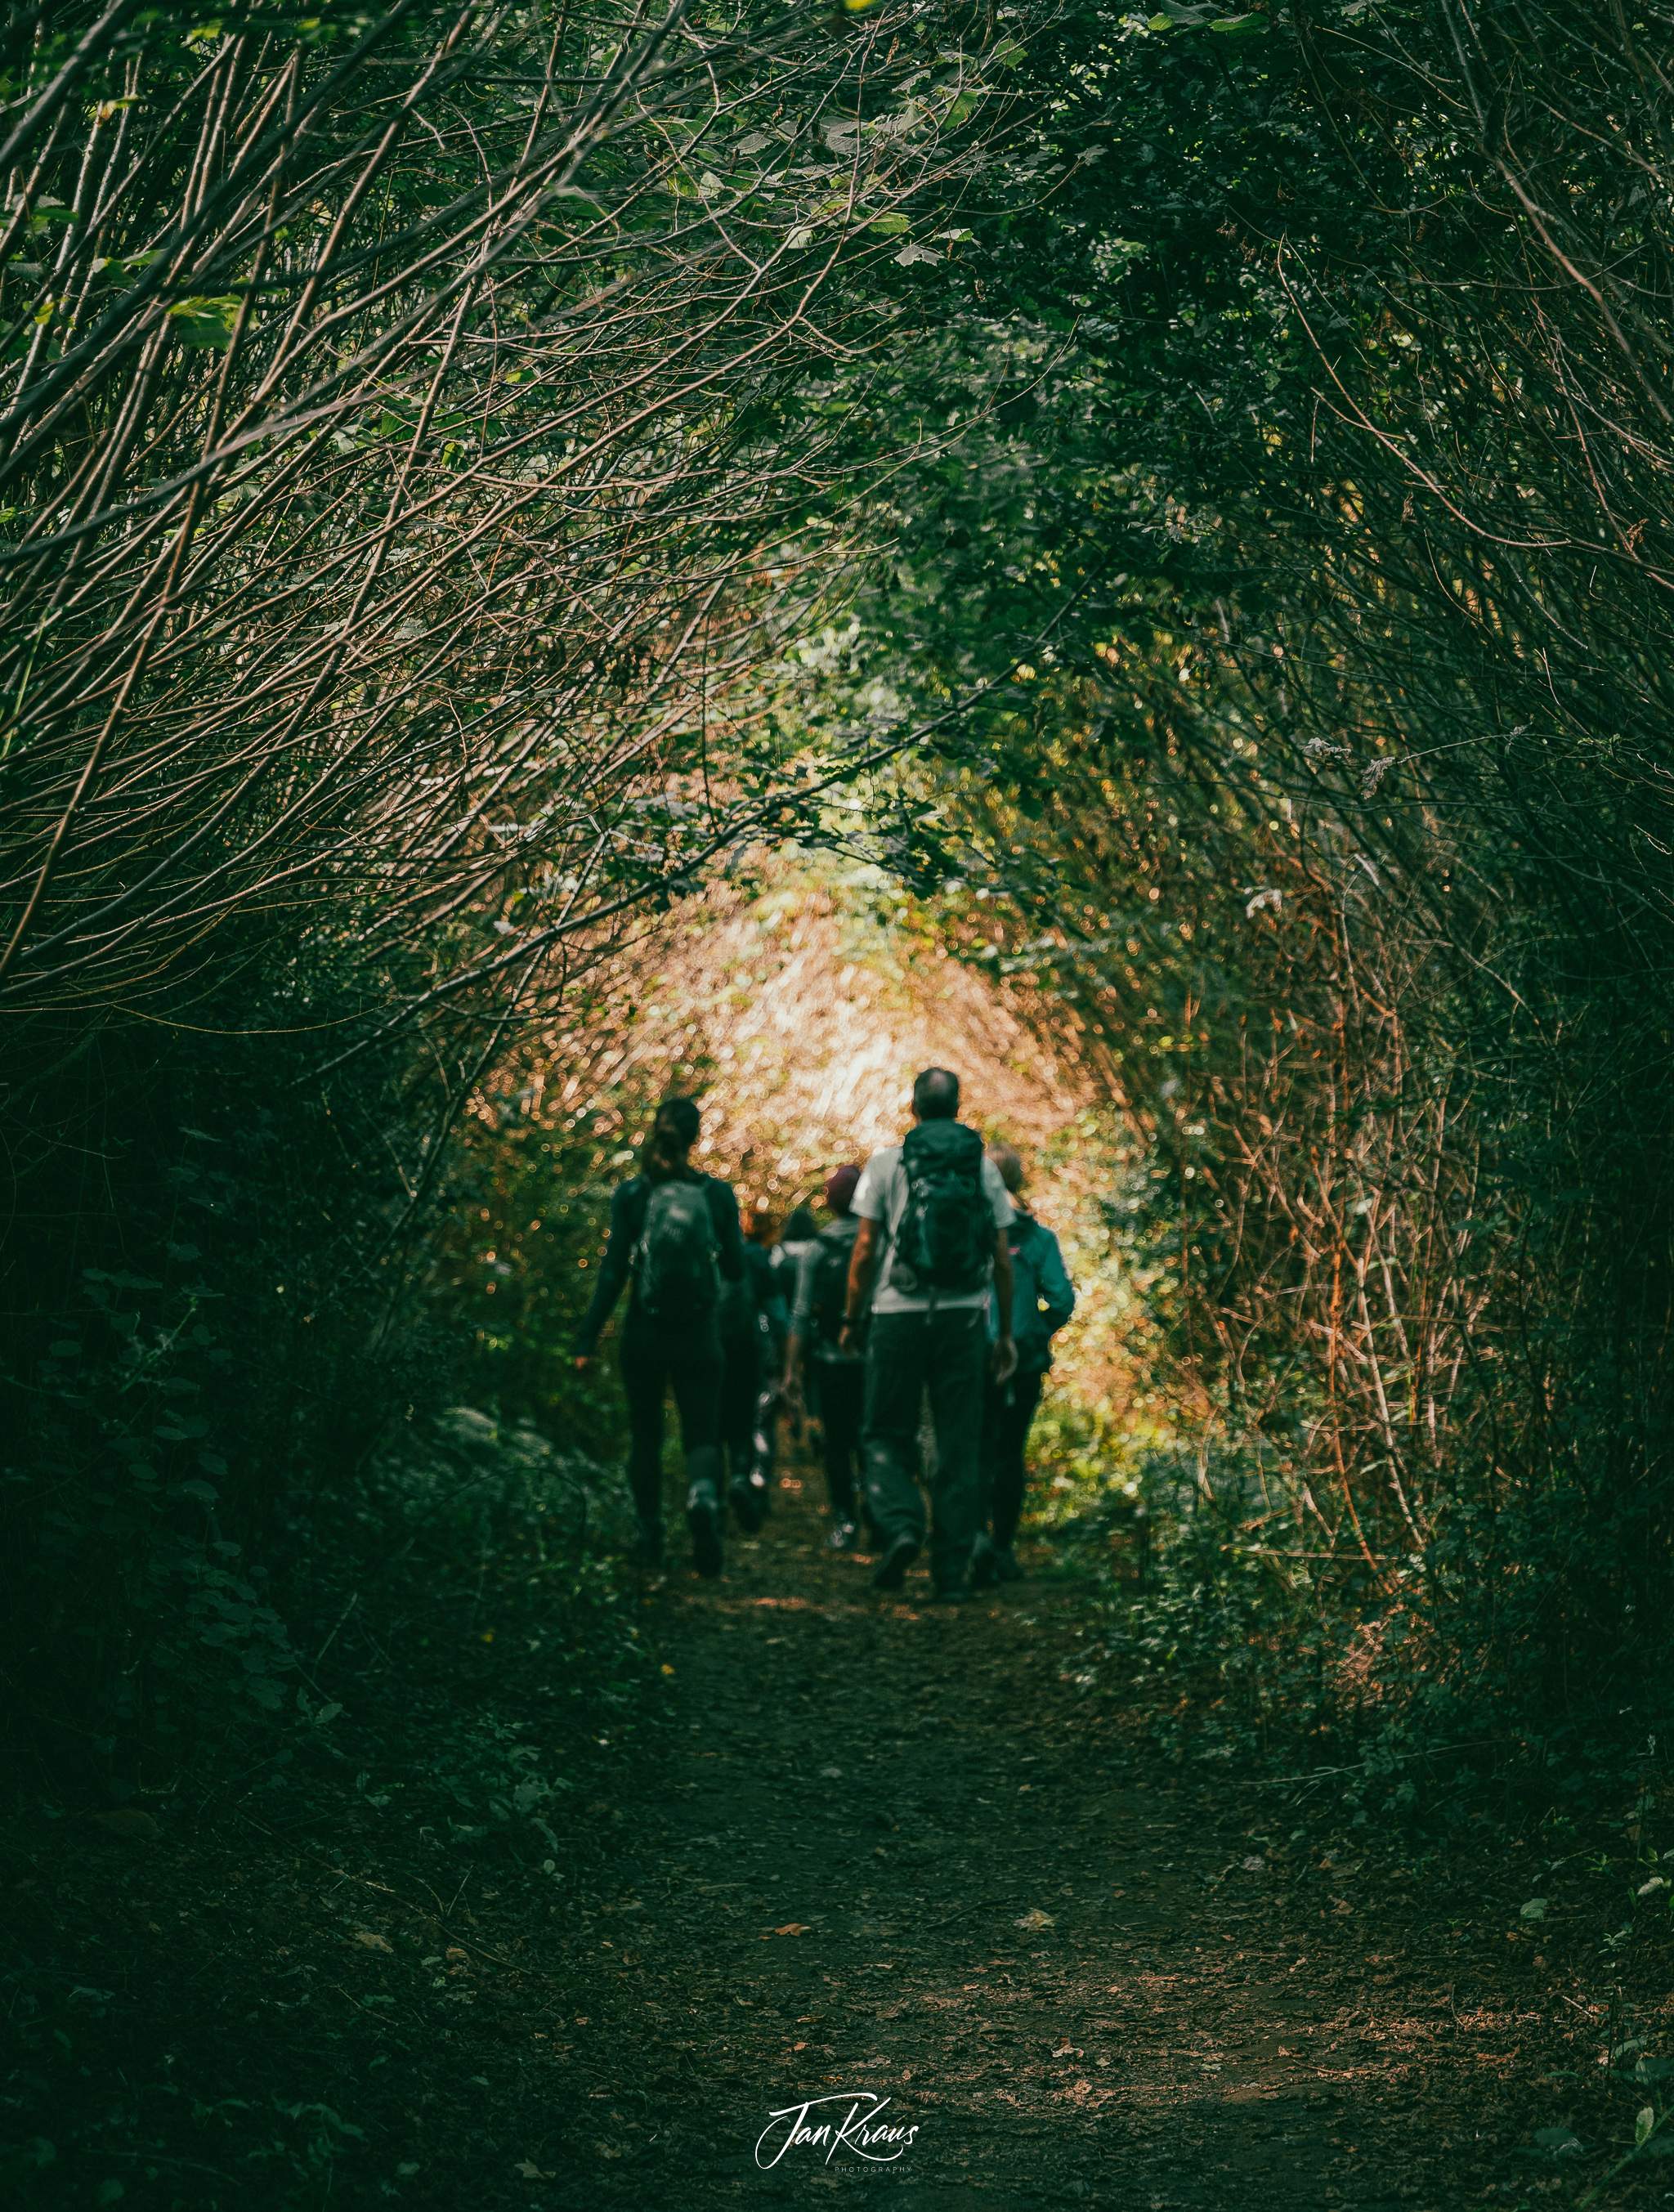 Our group walking through natural corridor created by the shrubs around the path, East Sussex, England, UK